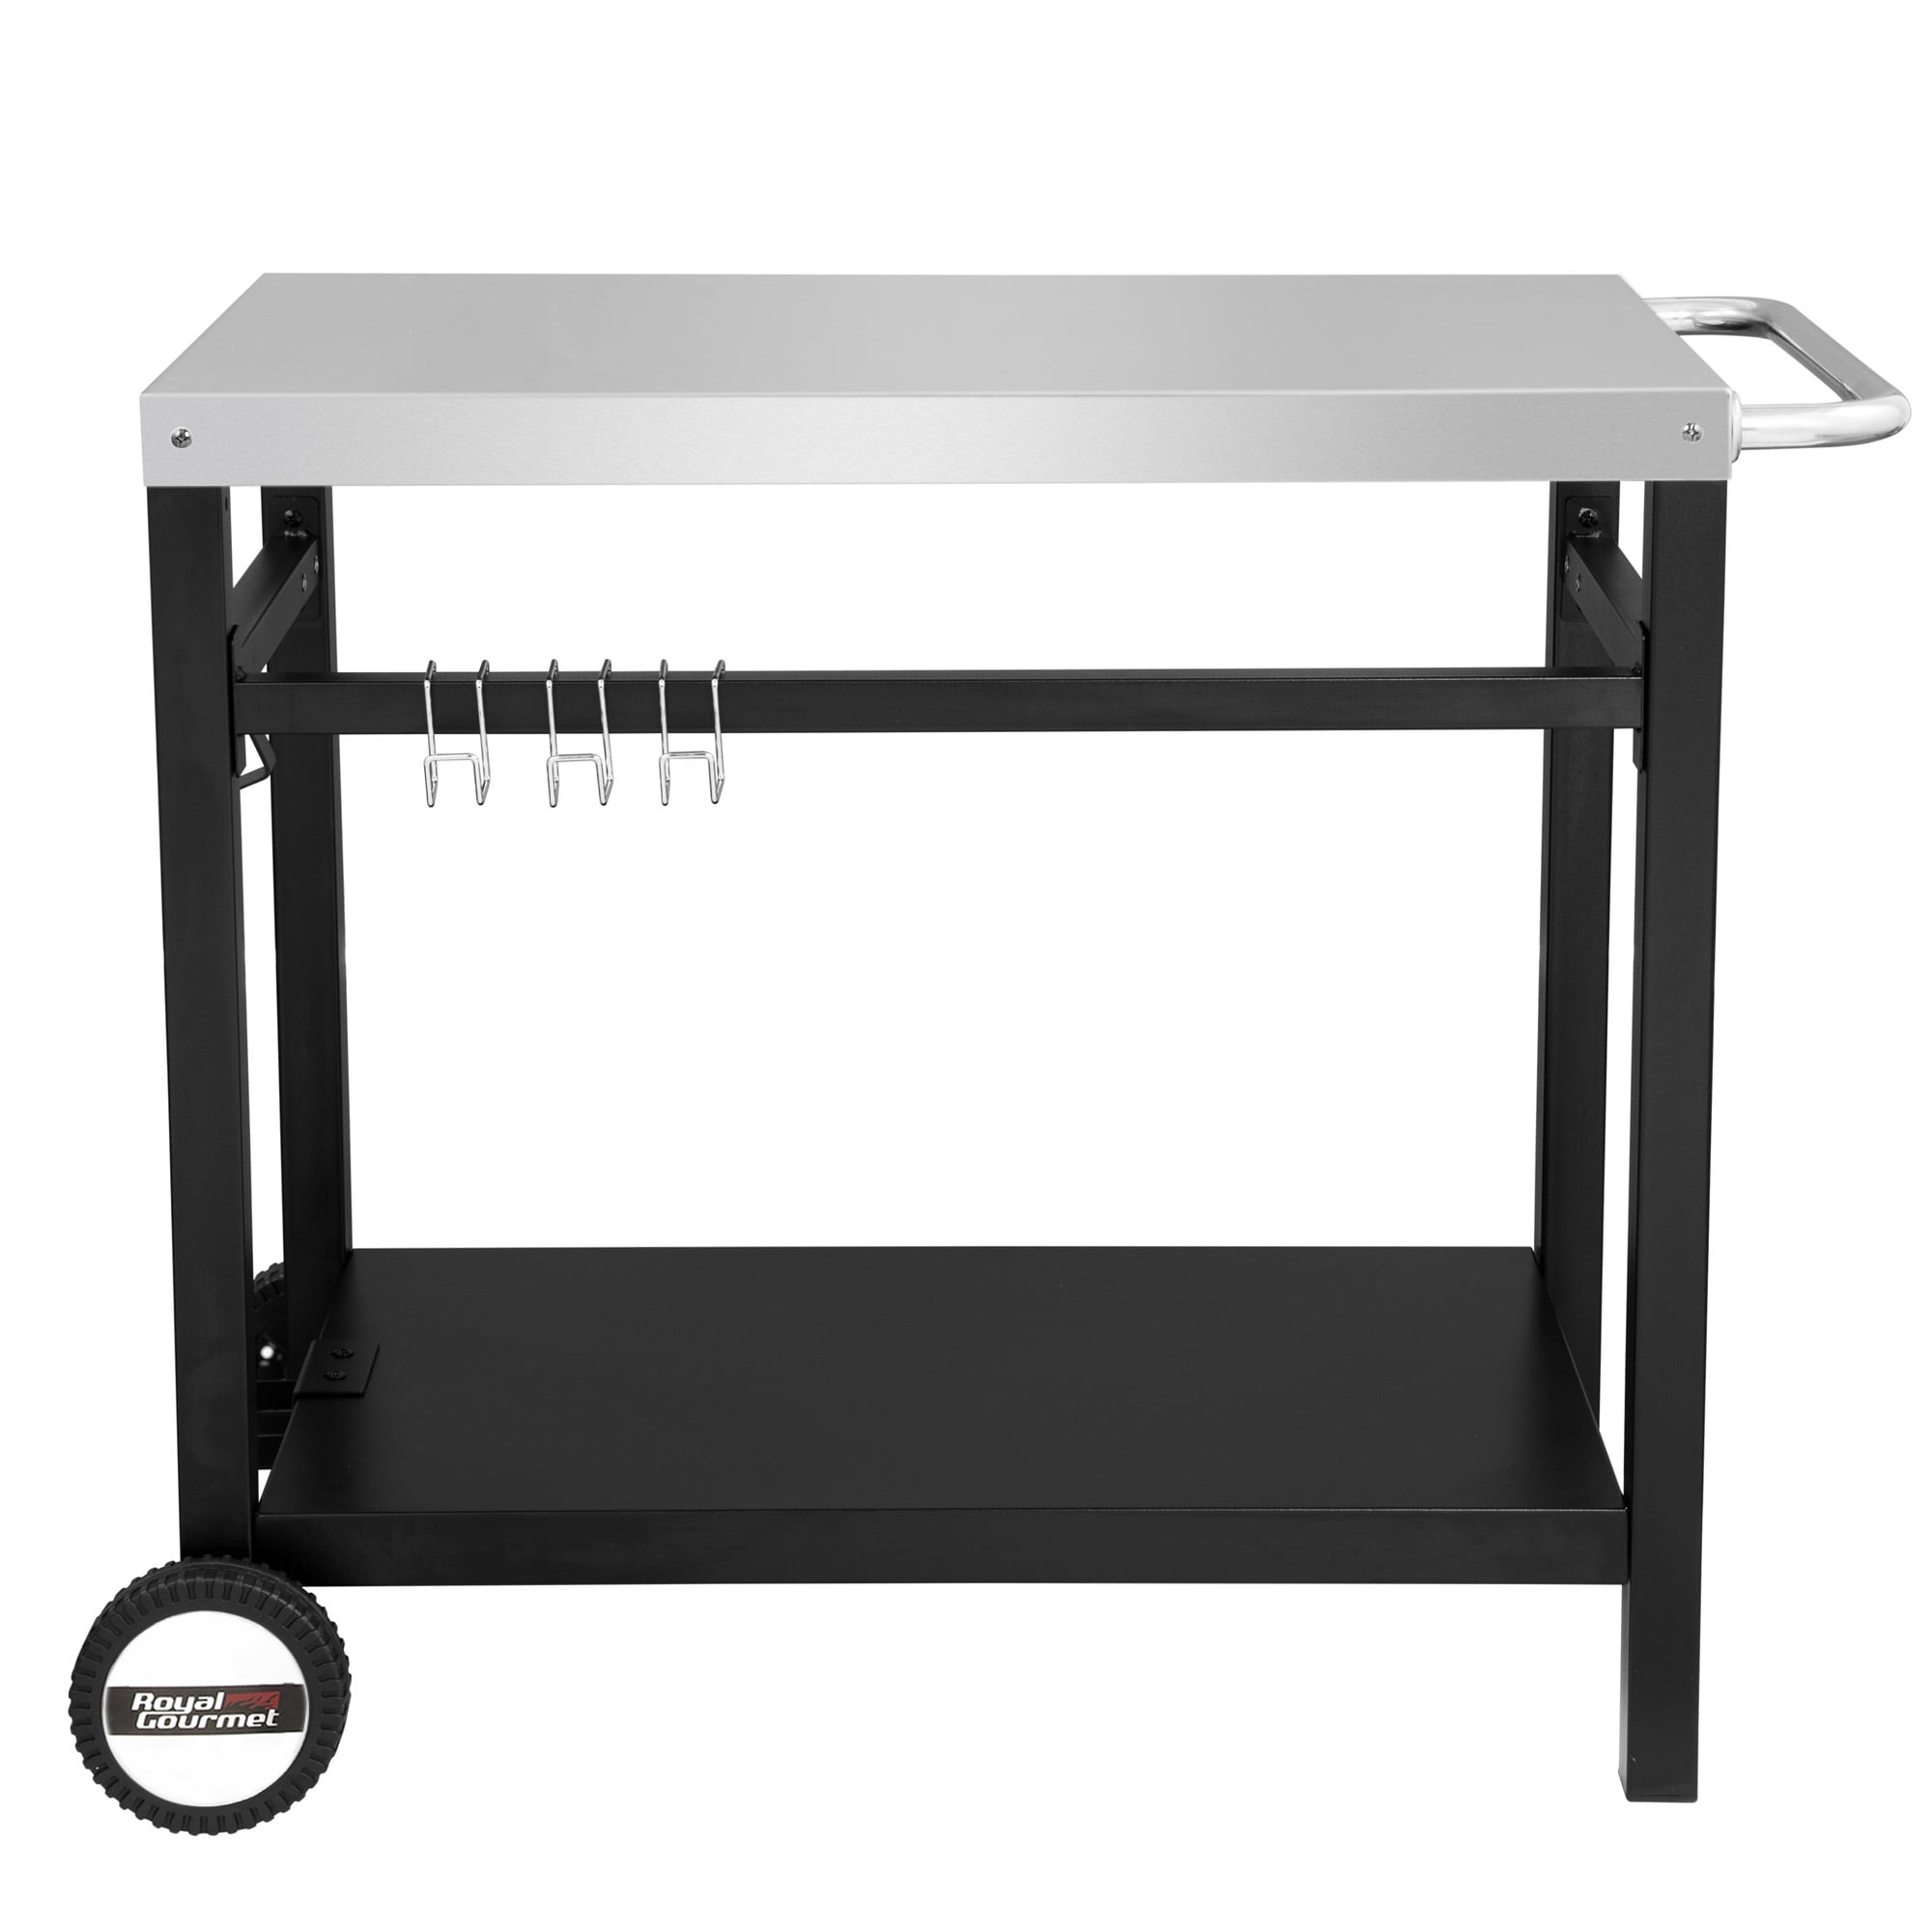 OOX Portable Grill Table with Double-Shelf for Outdoor Prep